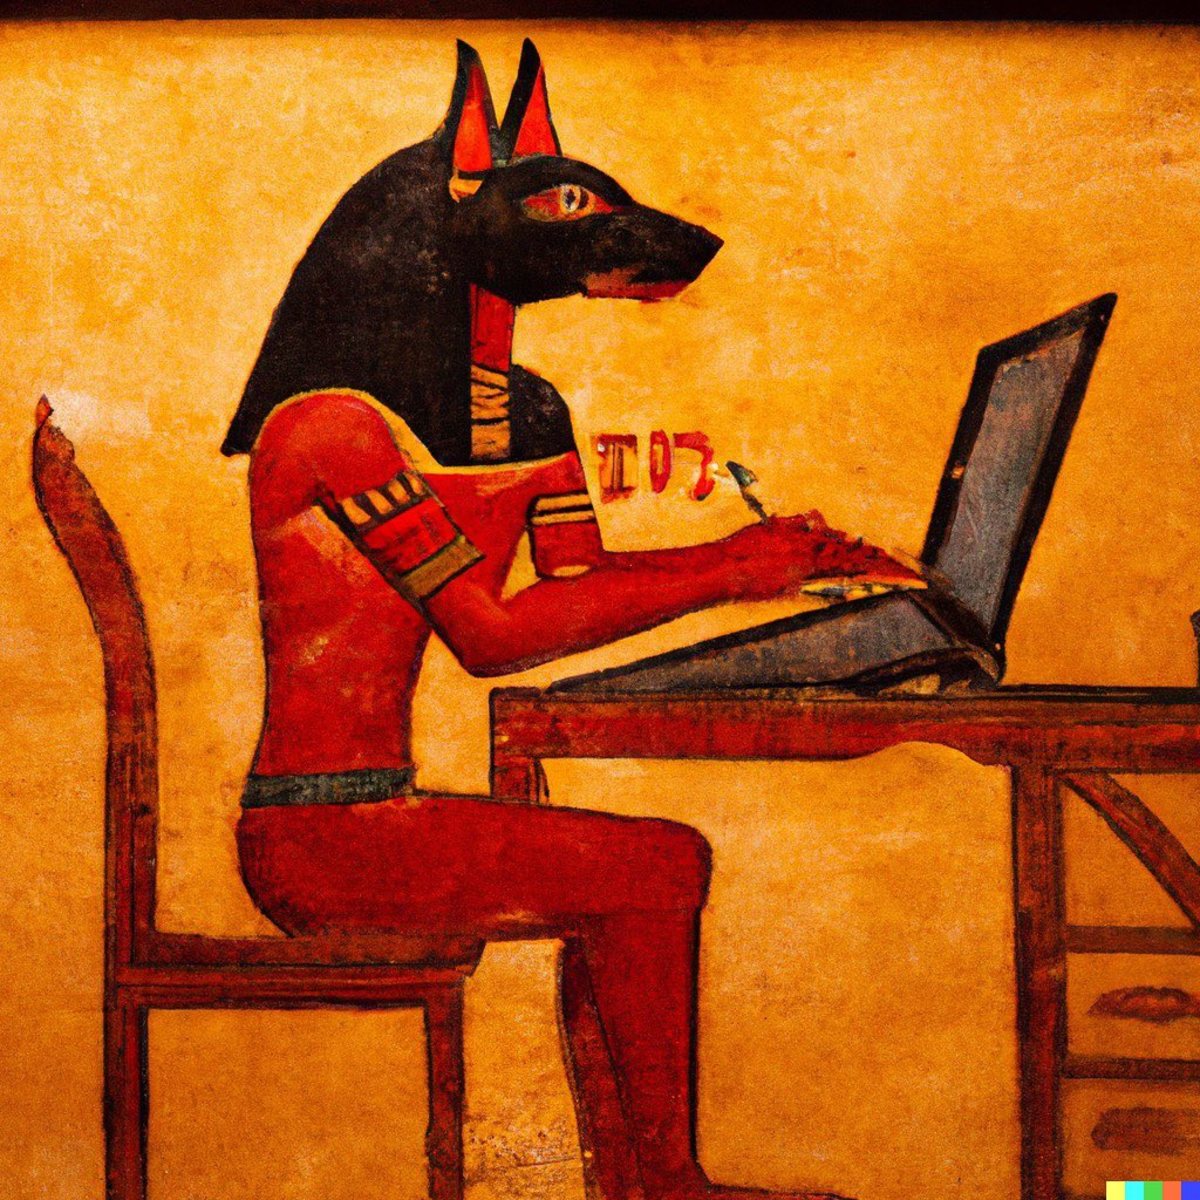 An ancient Egyptian mural of an Egyptian animal god using a computer (Actual text prompt used)